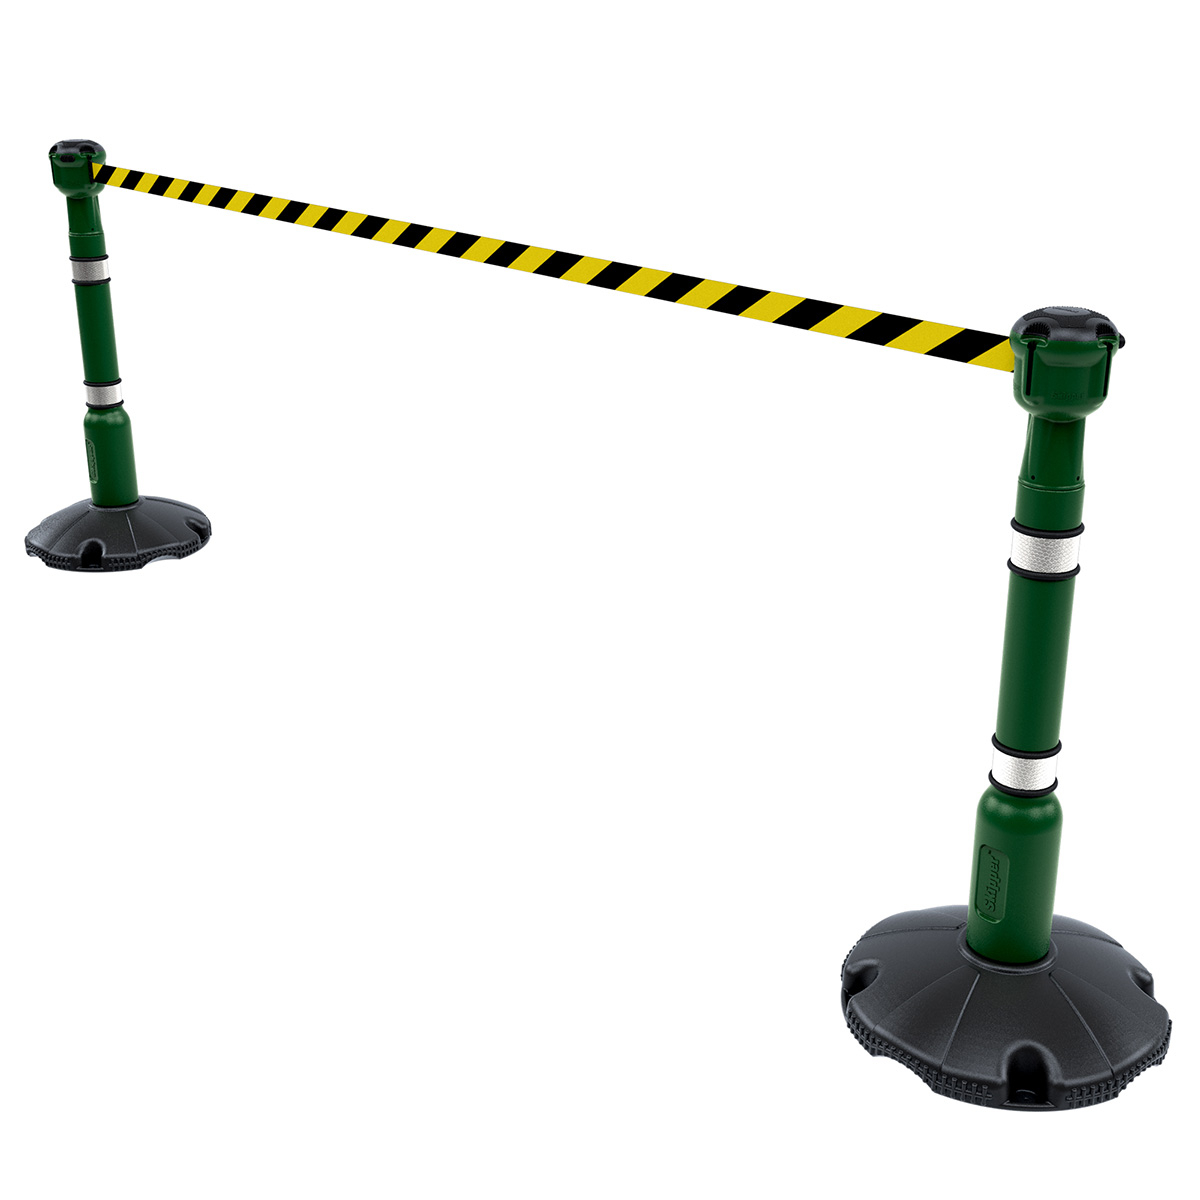 Skipper™ Retractable Barrier Kit 9m With Green Posts And Black And Yellow High Visibility Fabric Tape